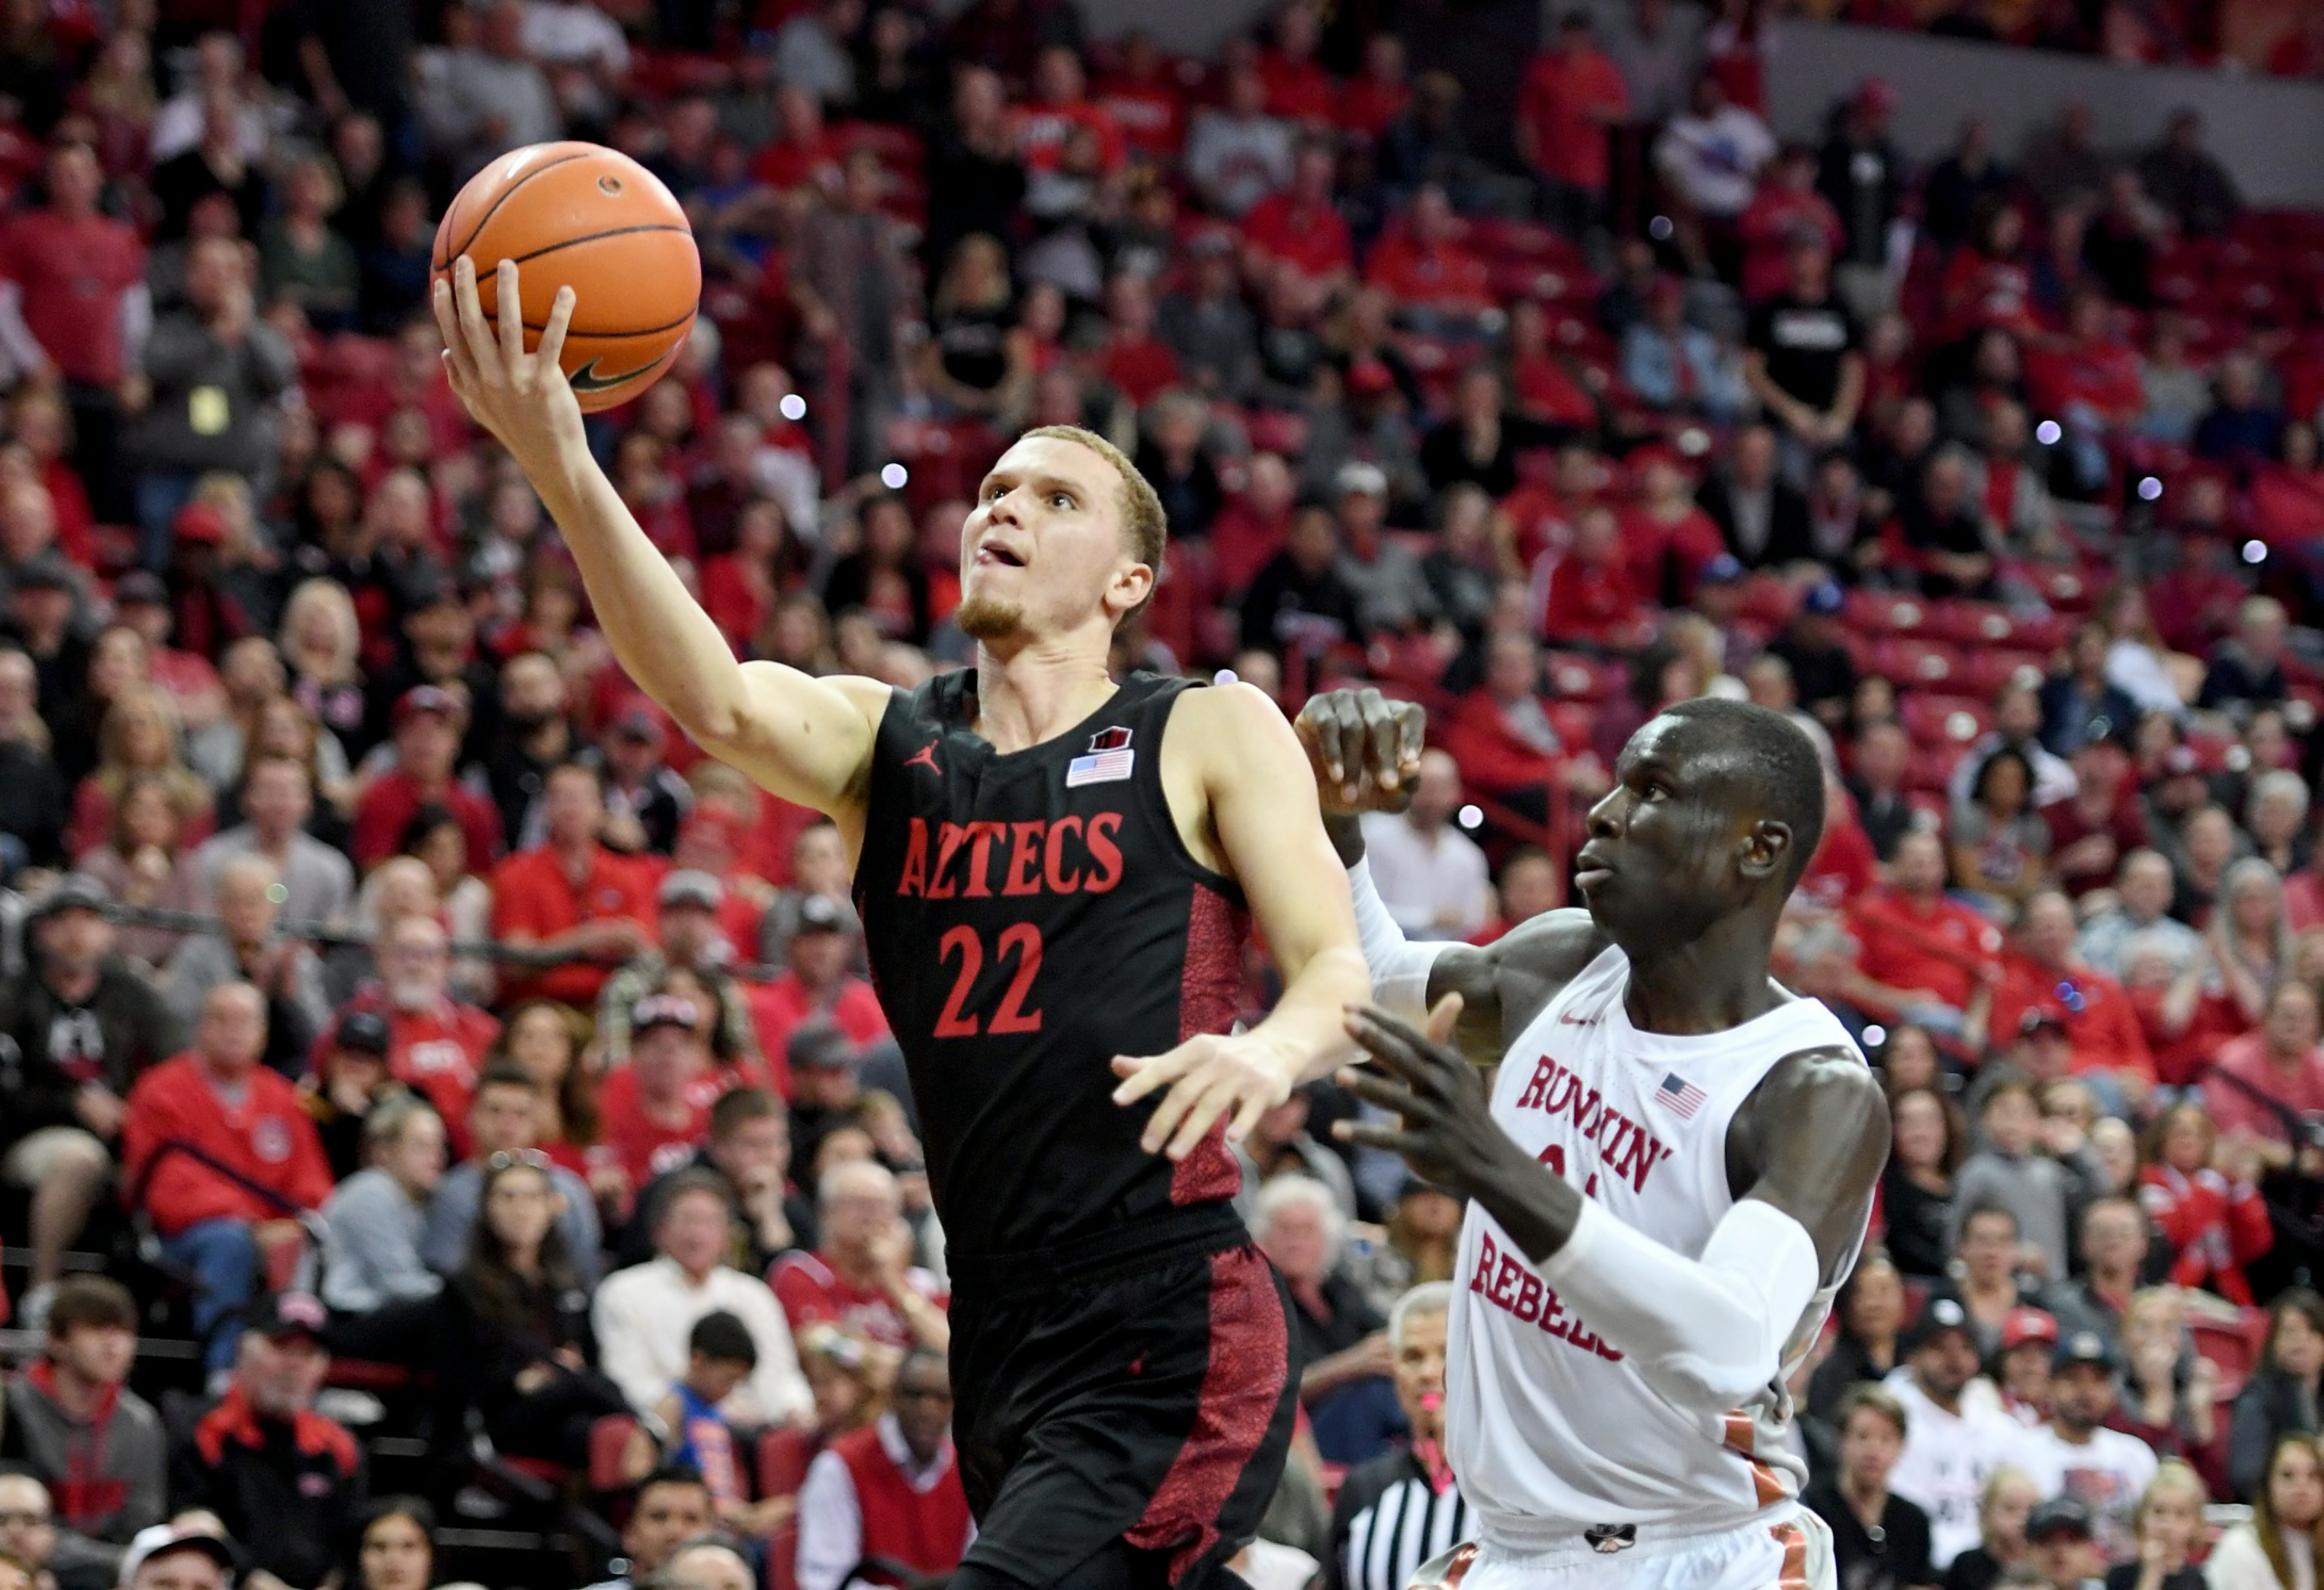 San Diego State Basketball 201920 keys to end losing streak at The Pit